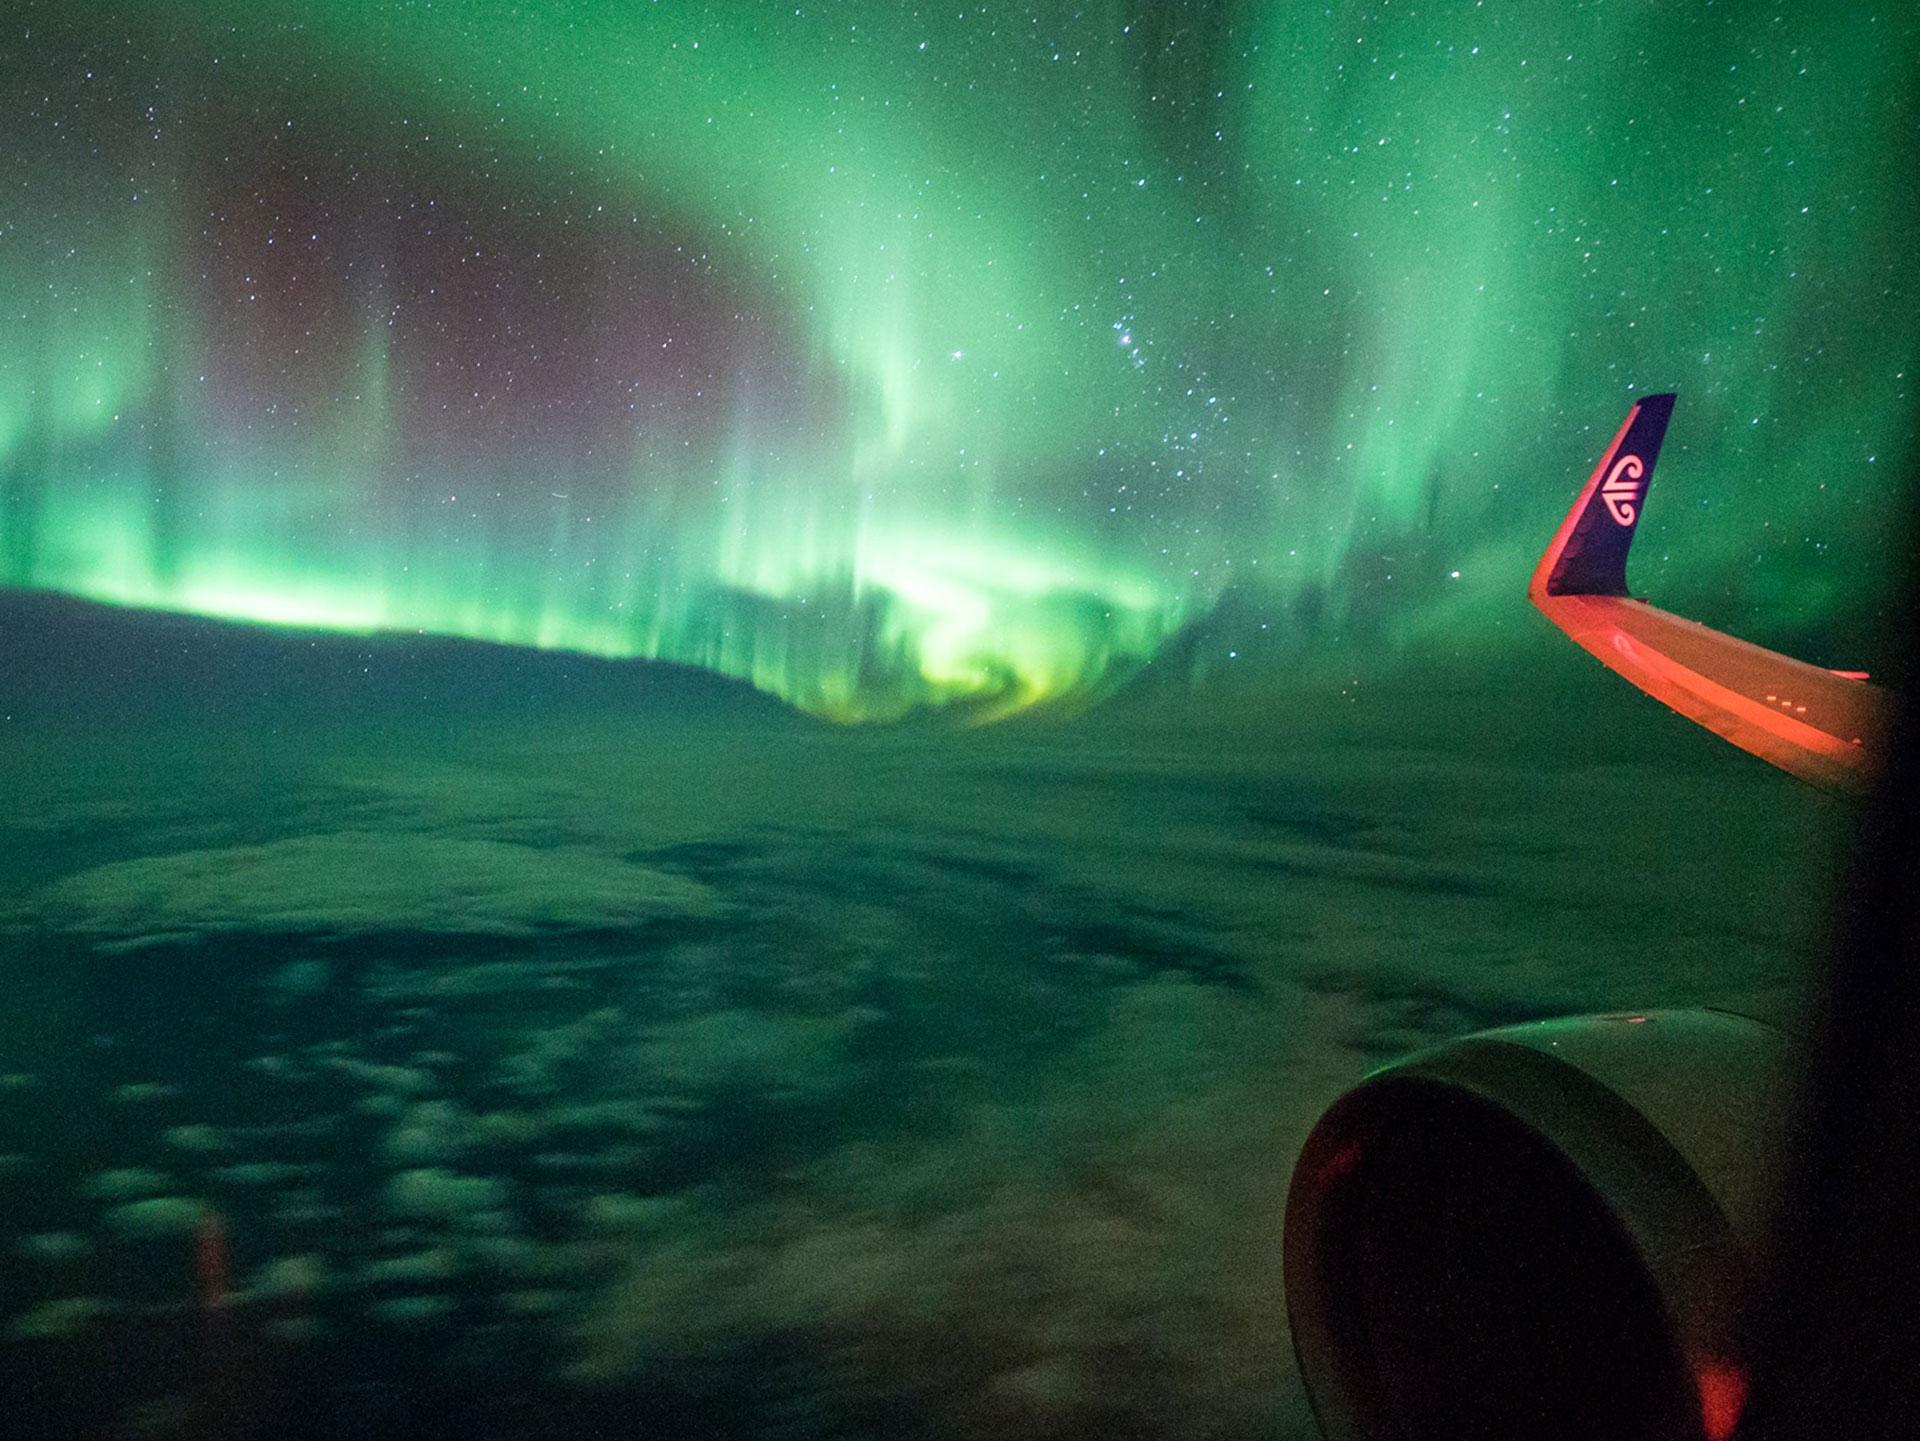 Watch this video of the Southern Lights filmed from Air New Zealand flight